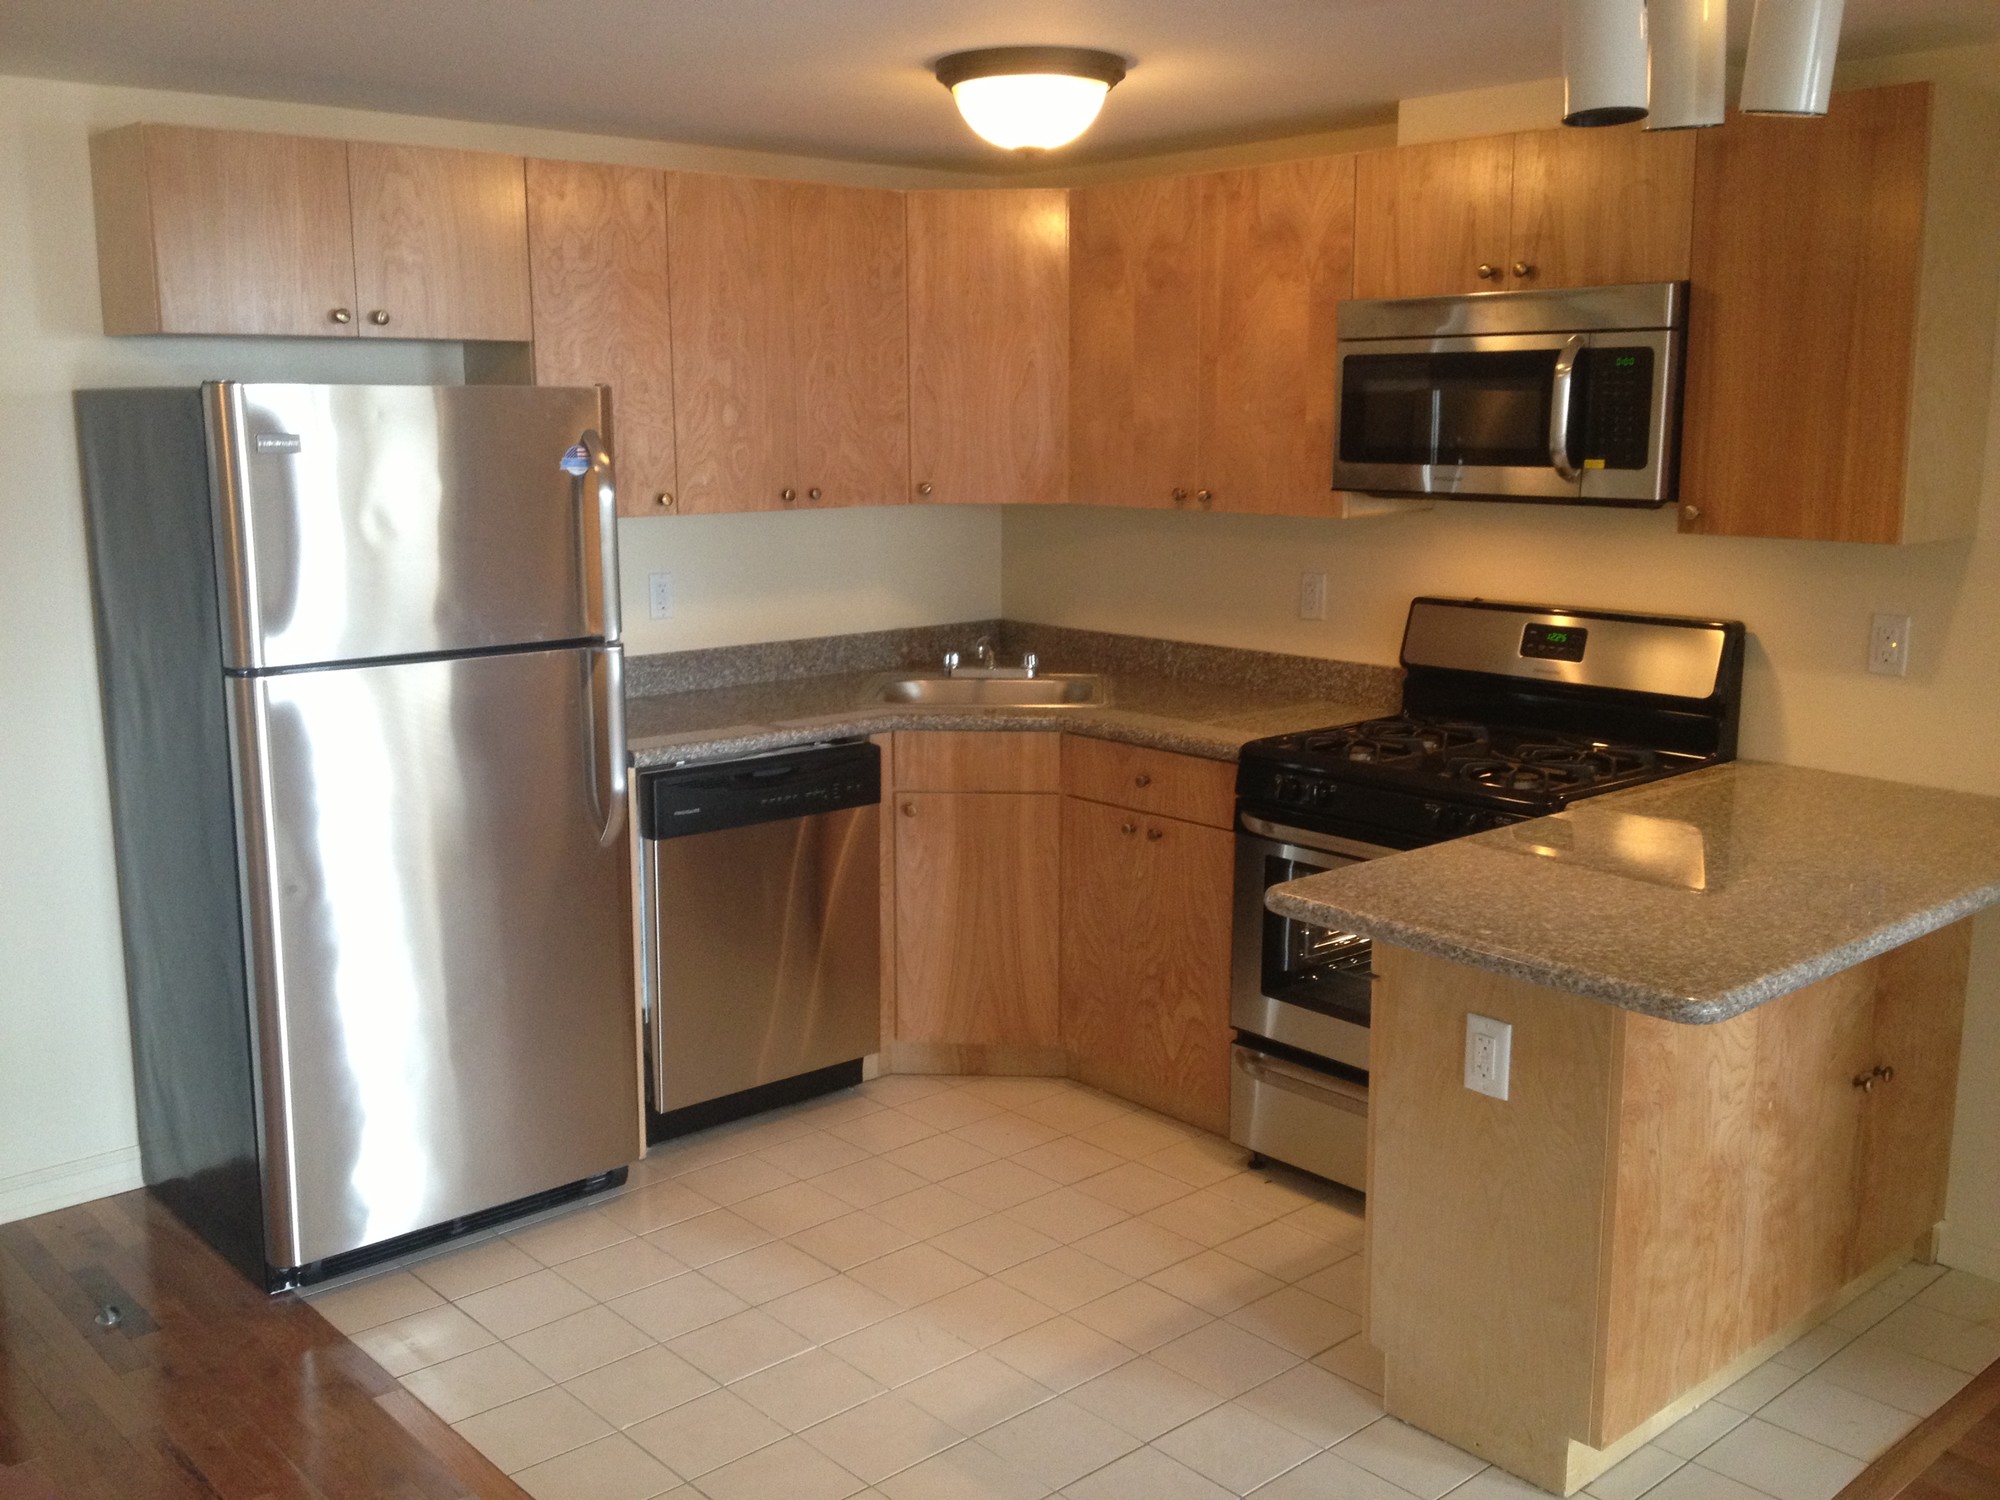 The building’s apartments feature kitchens with stainless steel appliances and granite countertops.